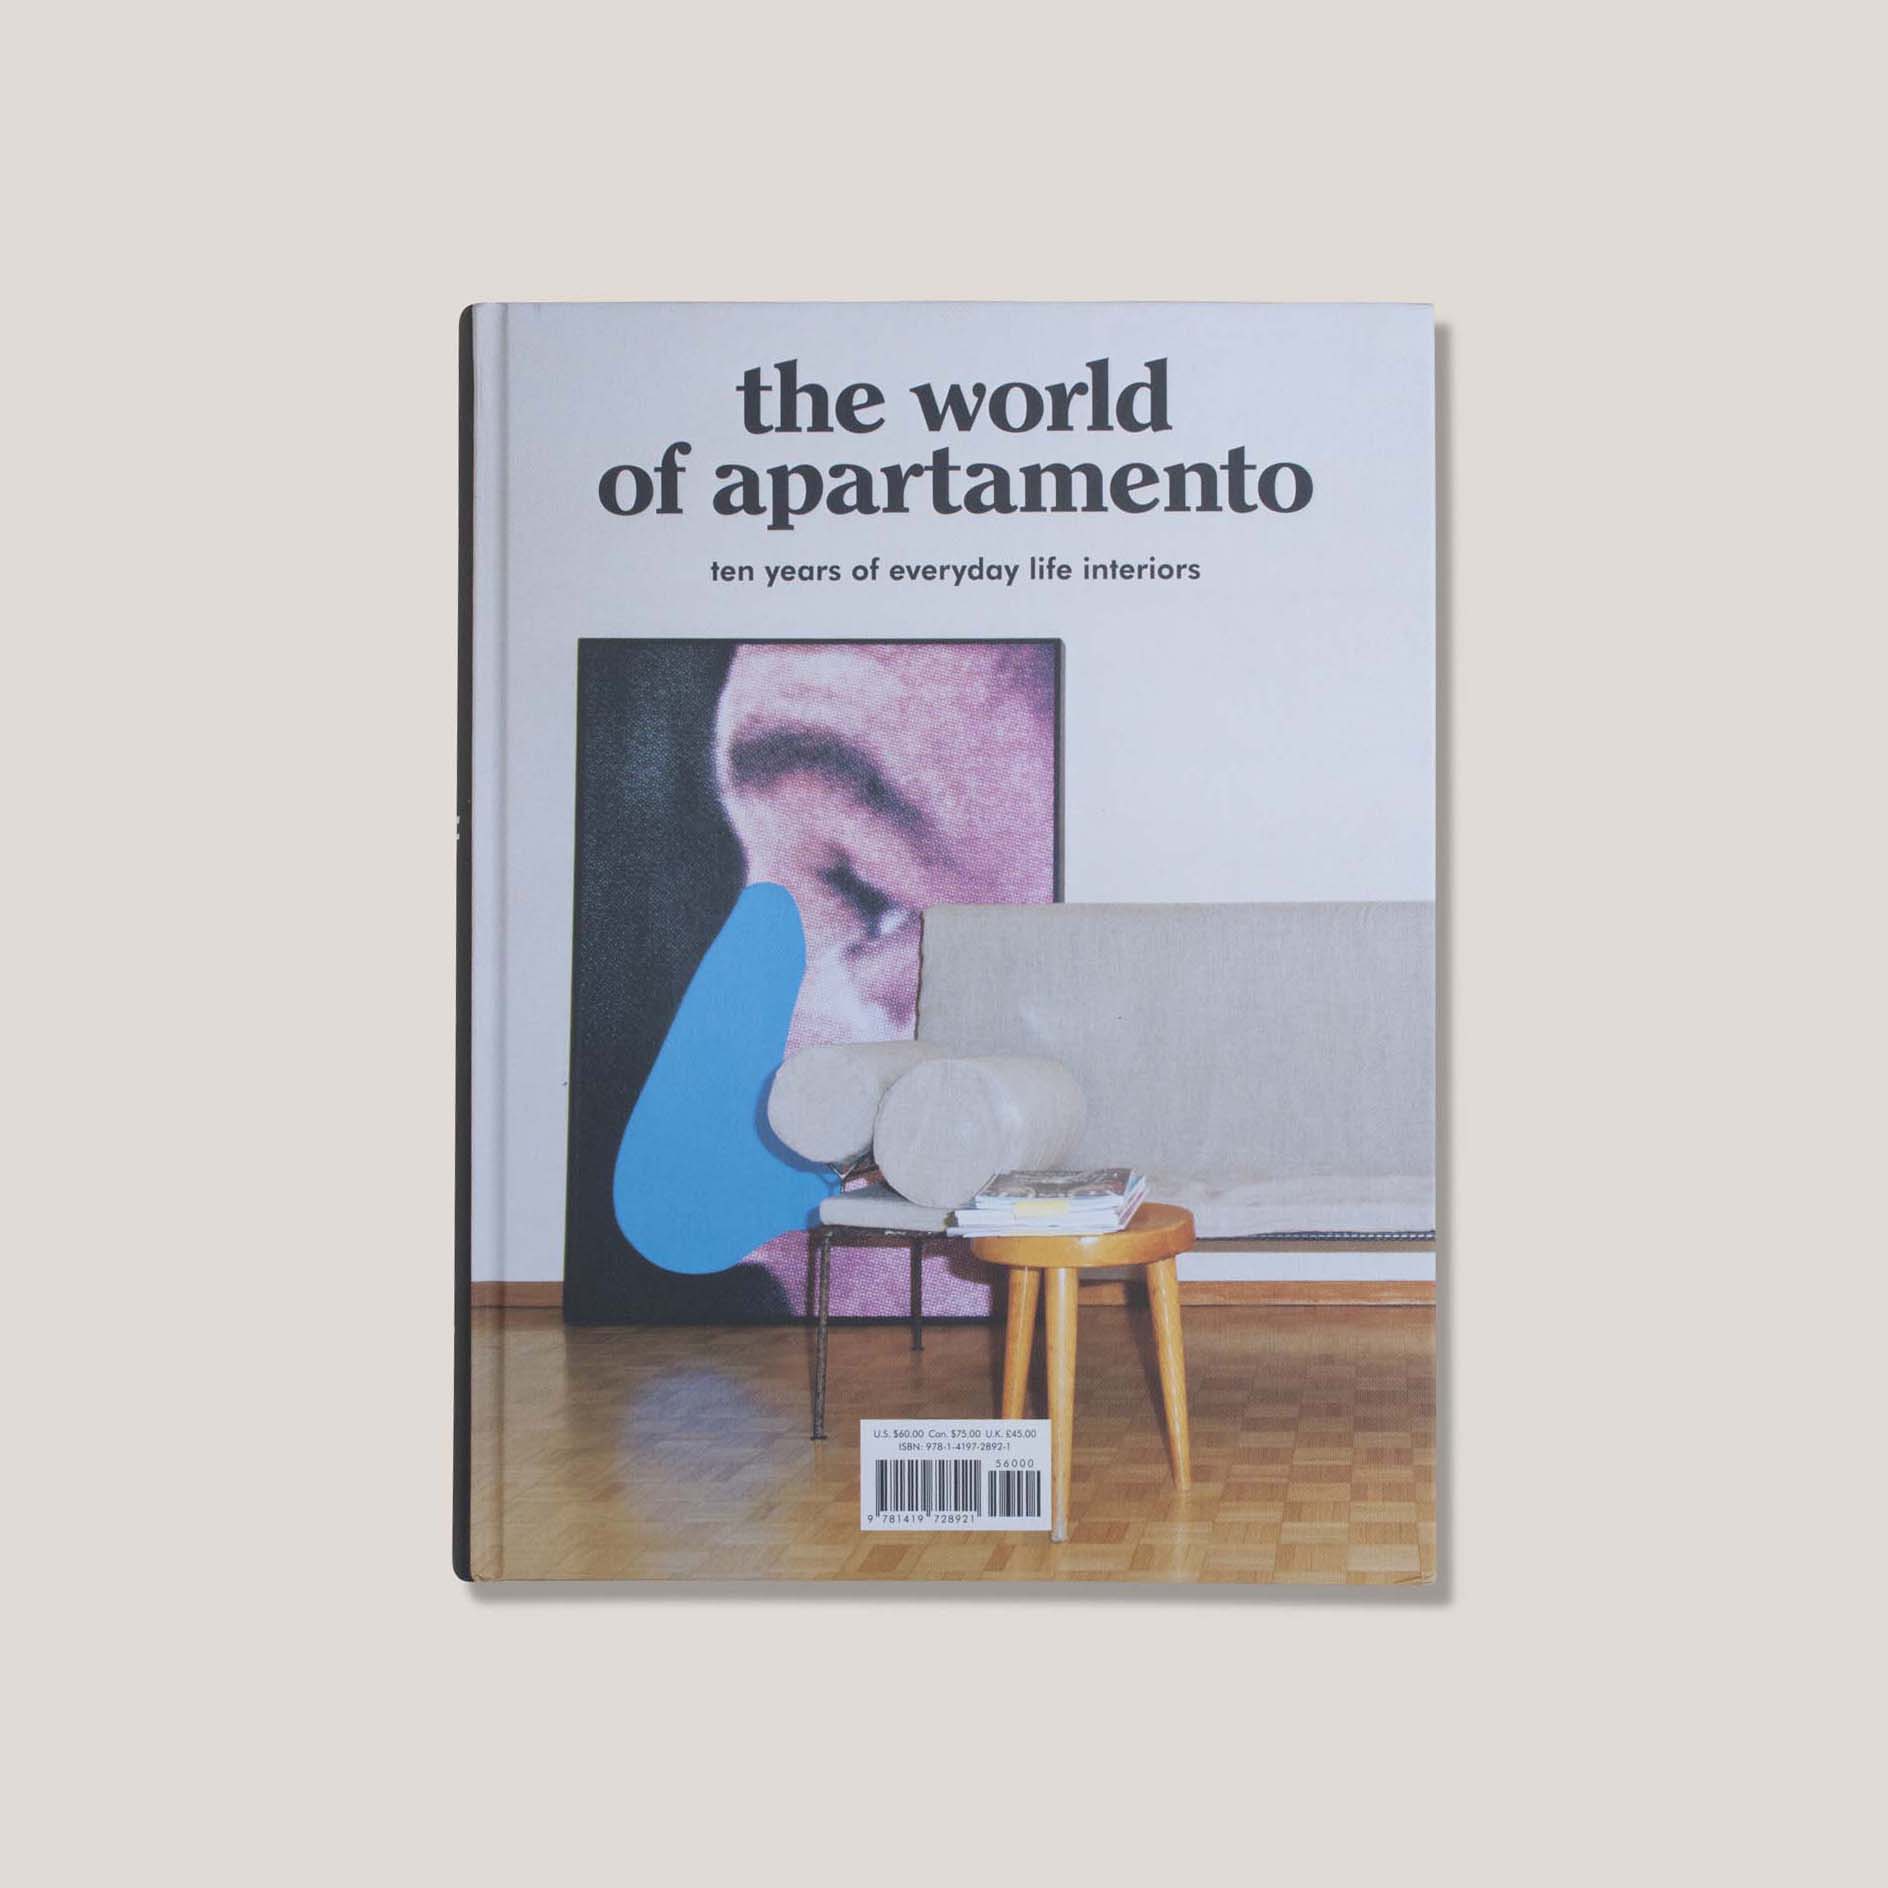 Photo of book cover for The World of Apartamento, showing a large Baldessari print leaned against a living room wall with a white sofa and parquet floors.